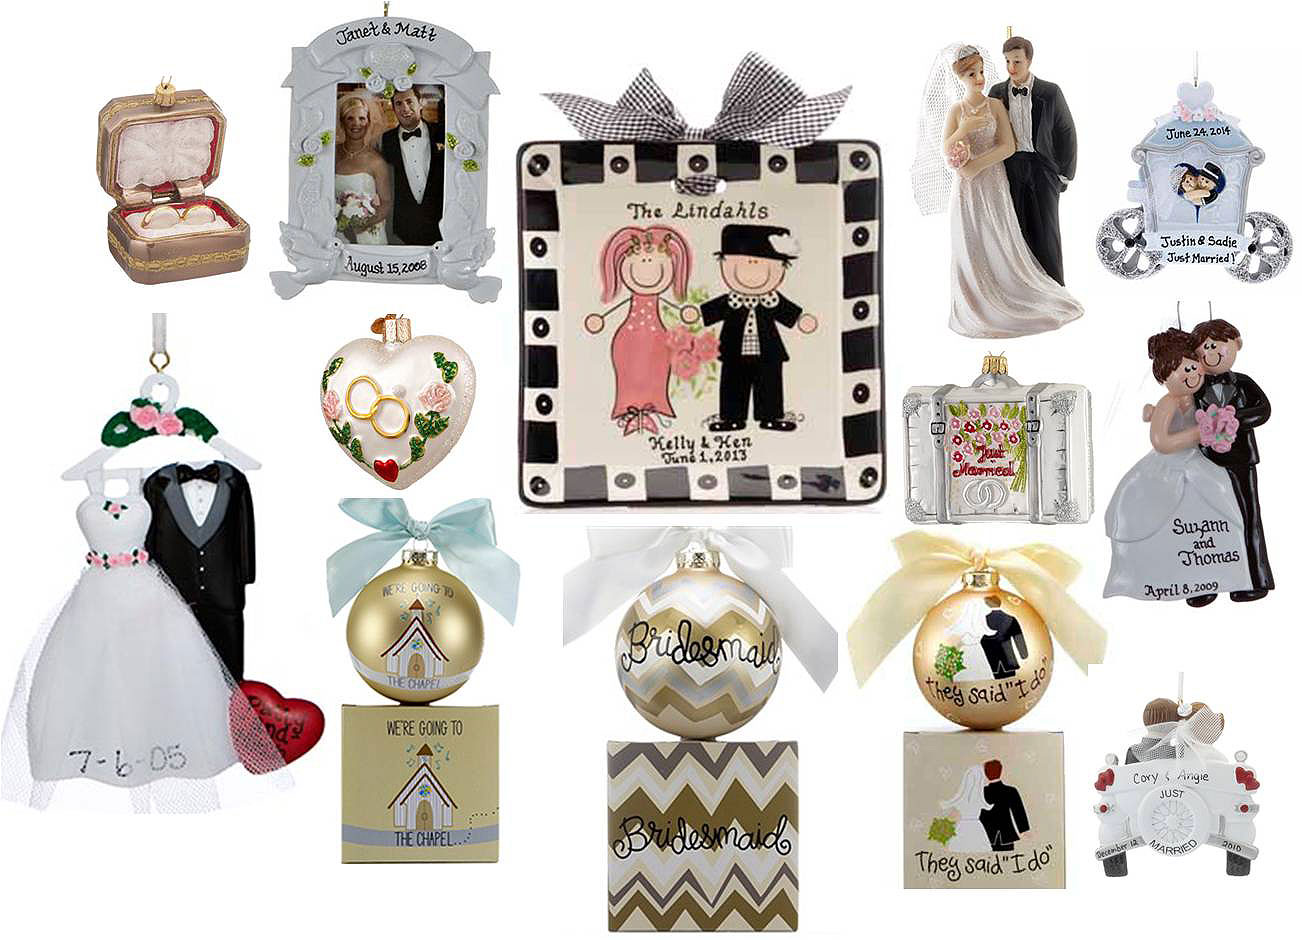 A collage of wedding ornaments found in the wedding section of Ornament Shop. | OrnamentShop.com